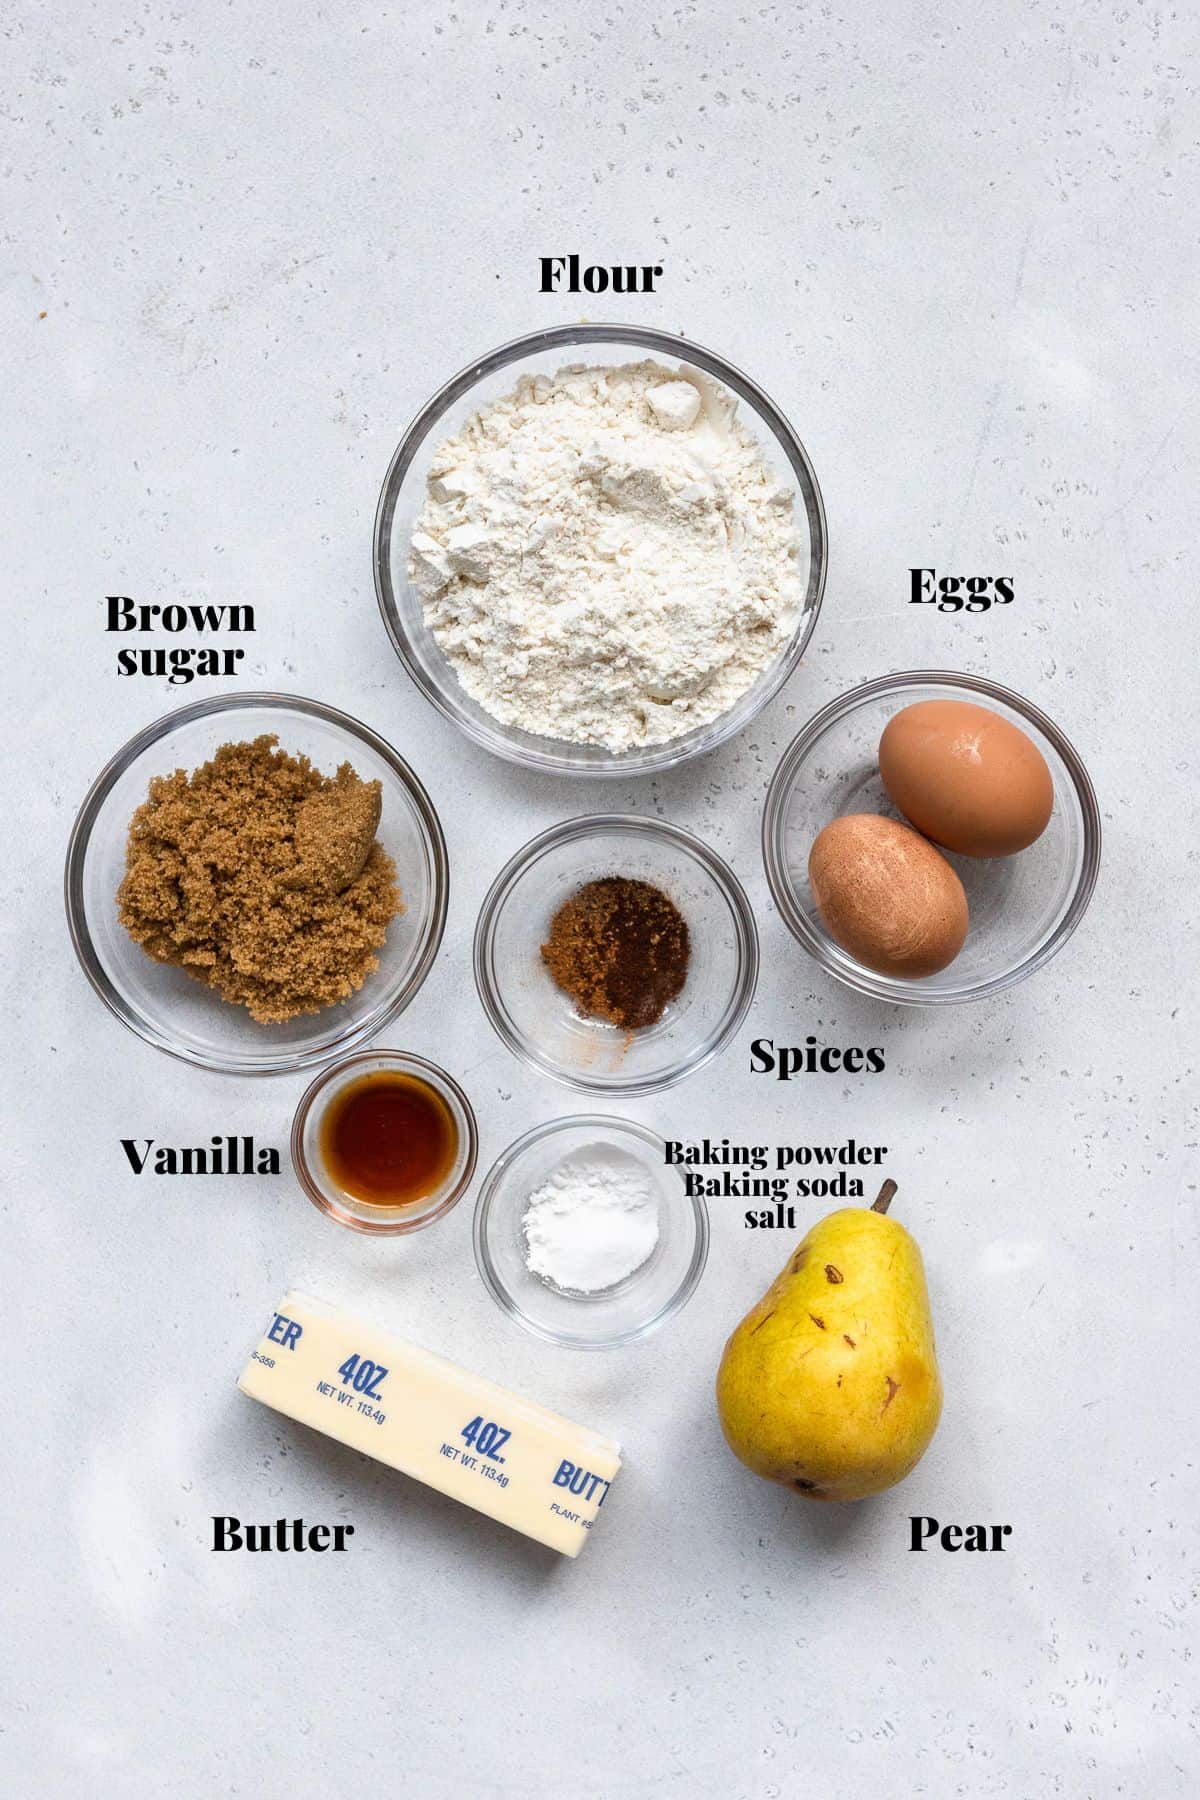 Ingredients to make vanilla pear bread with text labelling each ingredient on a white background.